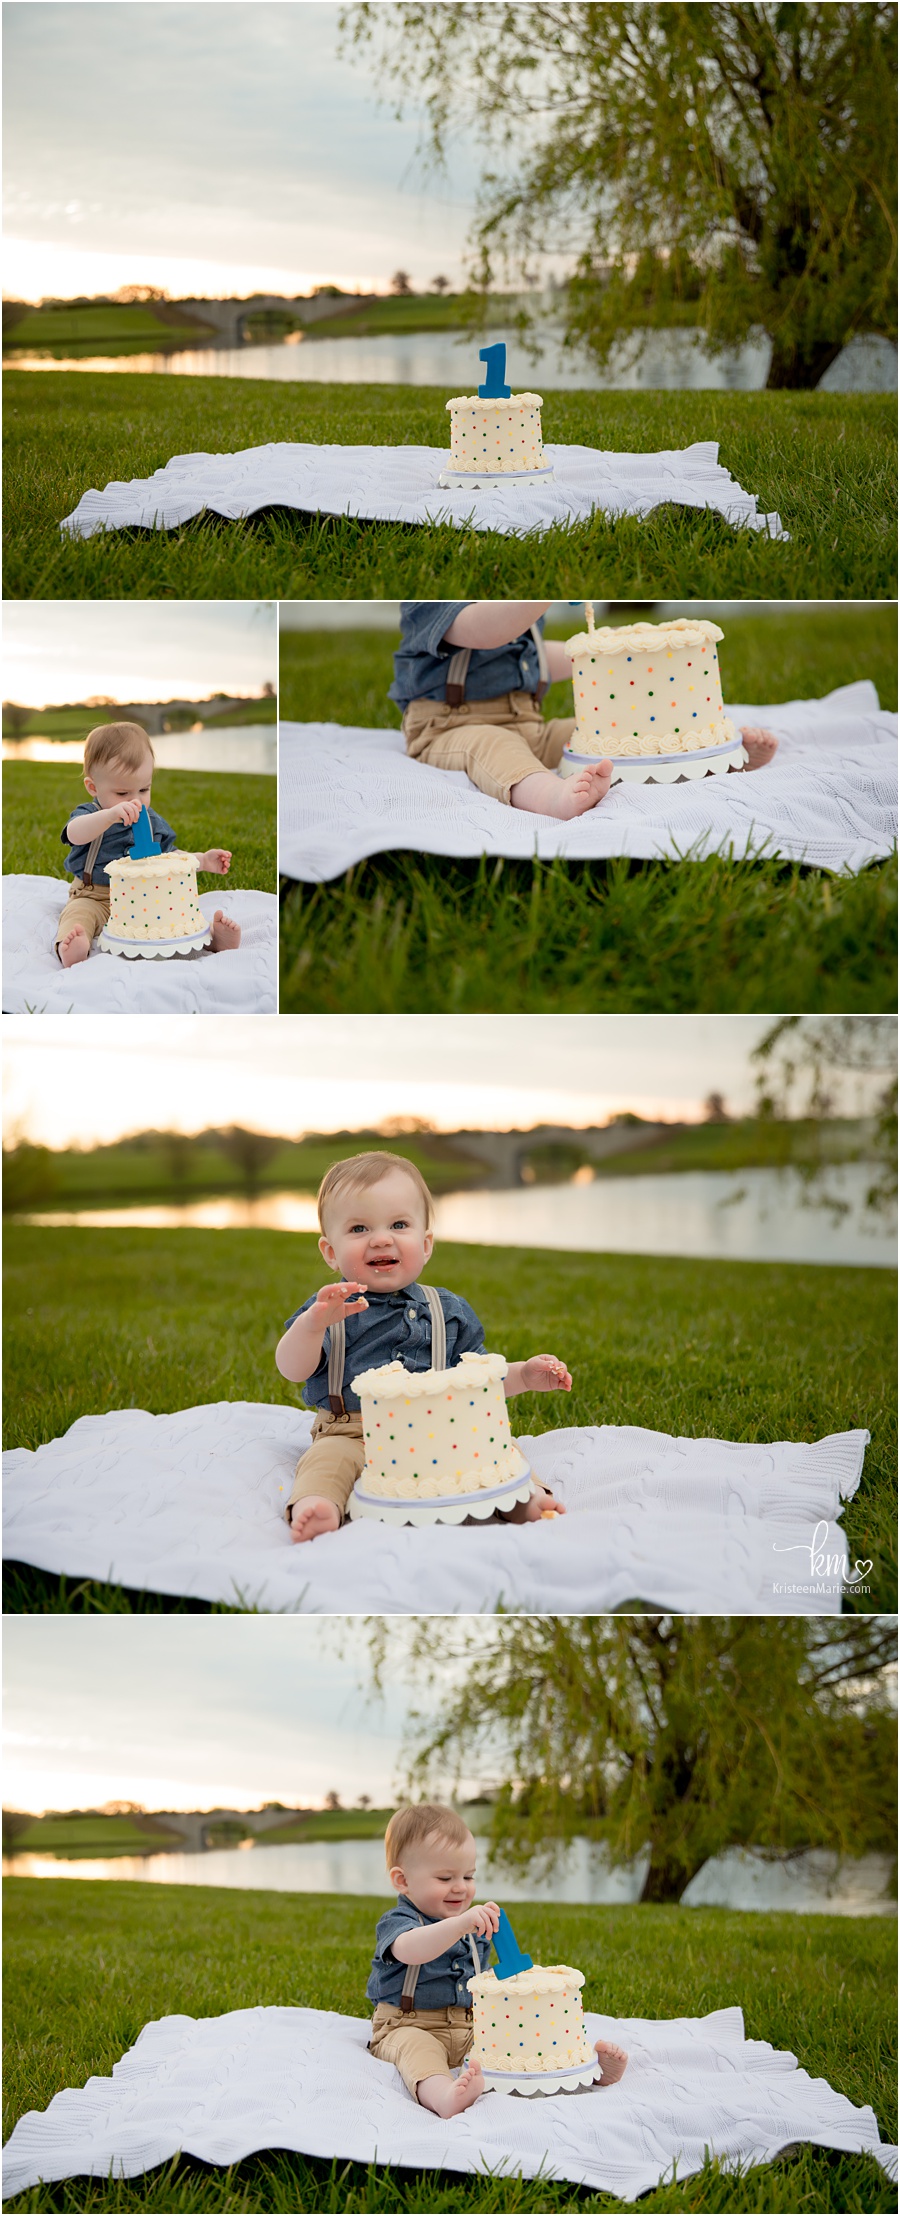 outdoor cake smash session at sunrise in Indianapolis - Indy family photography